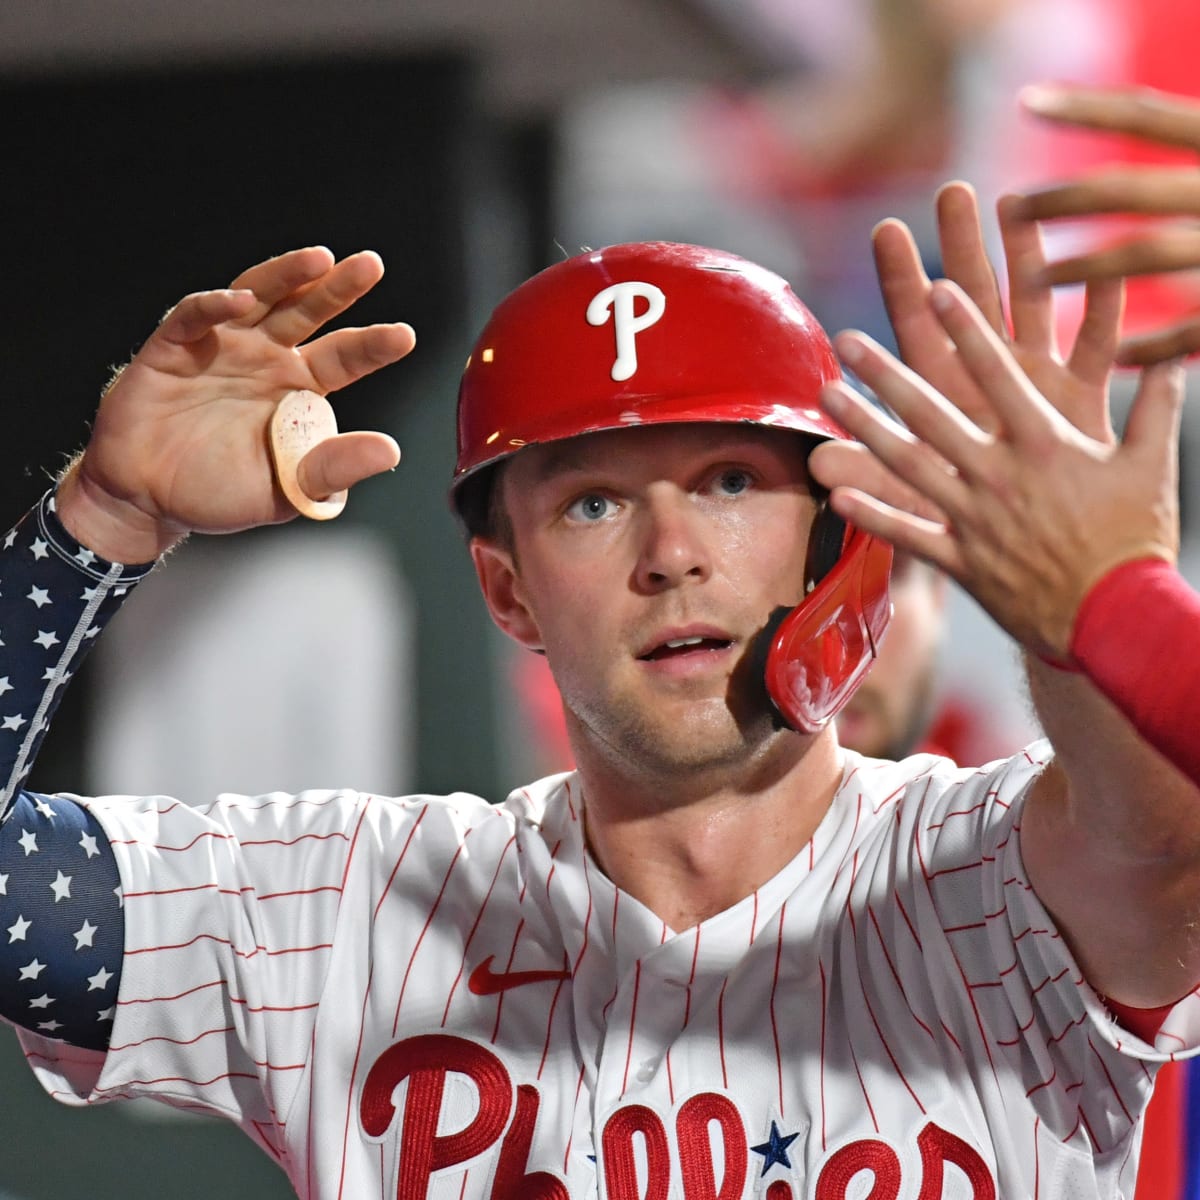 Rhys Hoskins' first pitch might be his last act in a Phillies uniform. So  he made sure to take it all in.